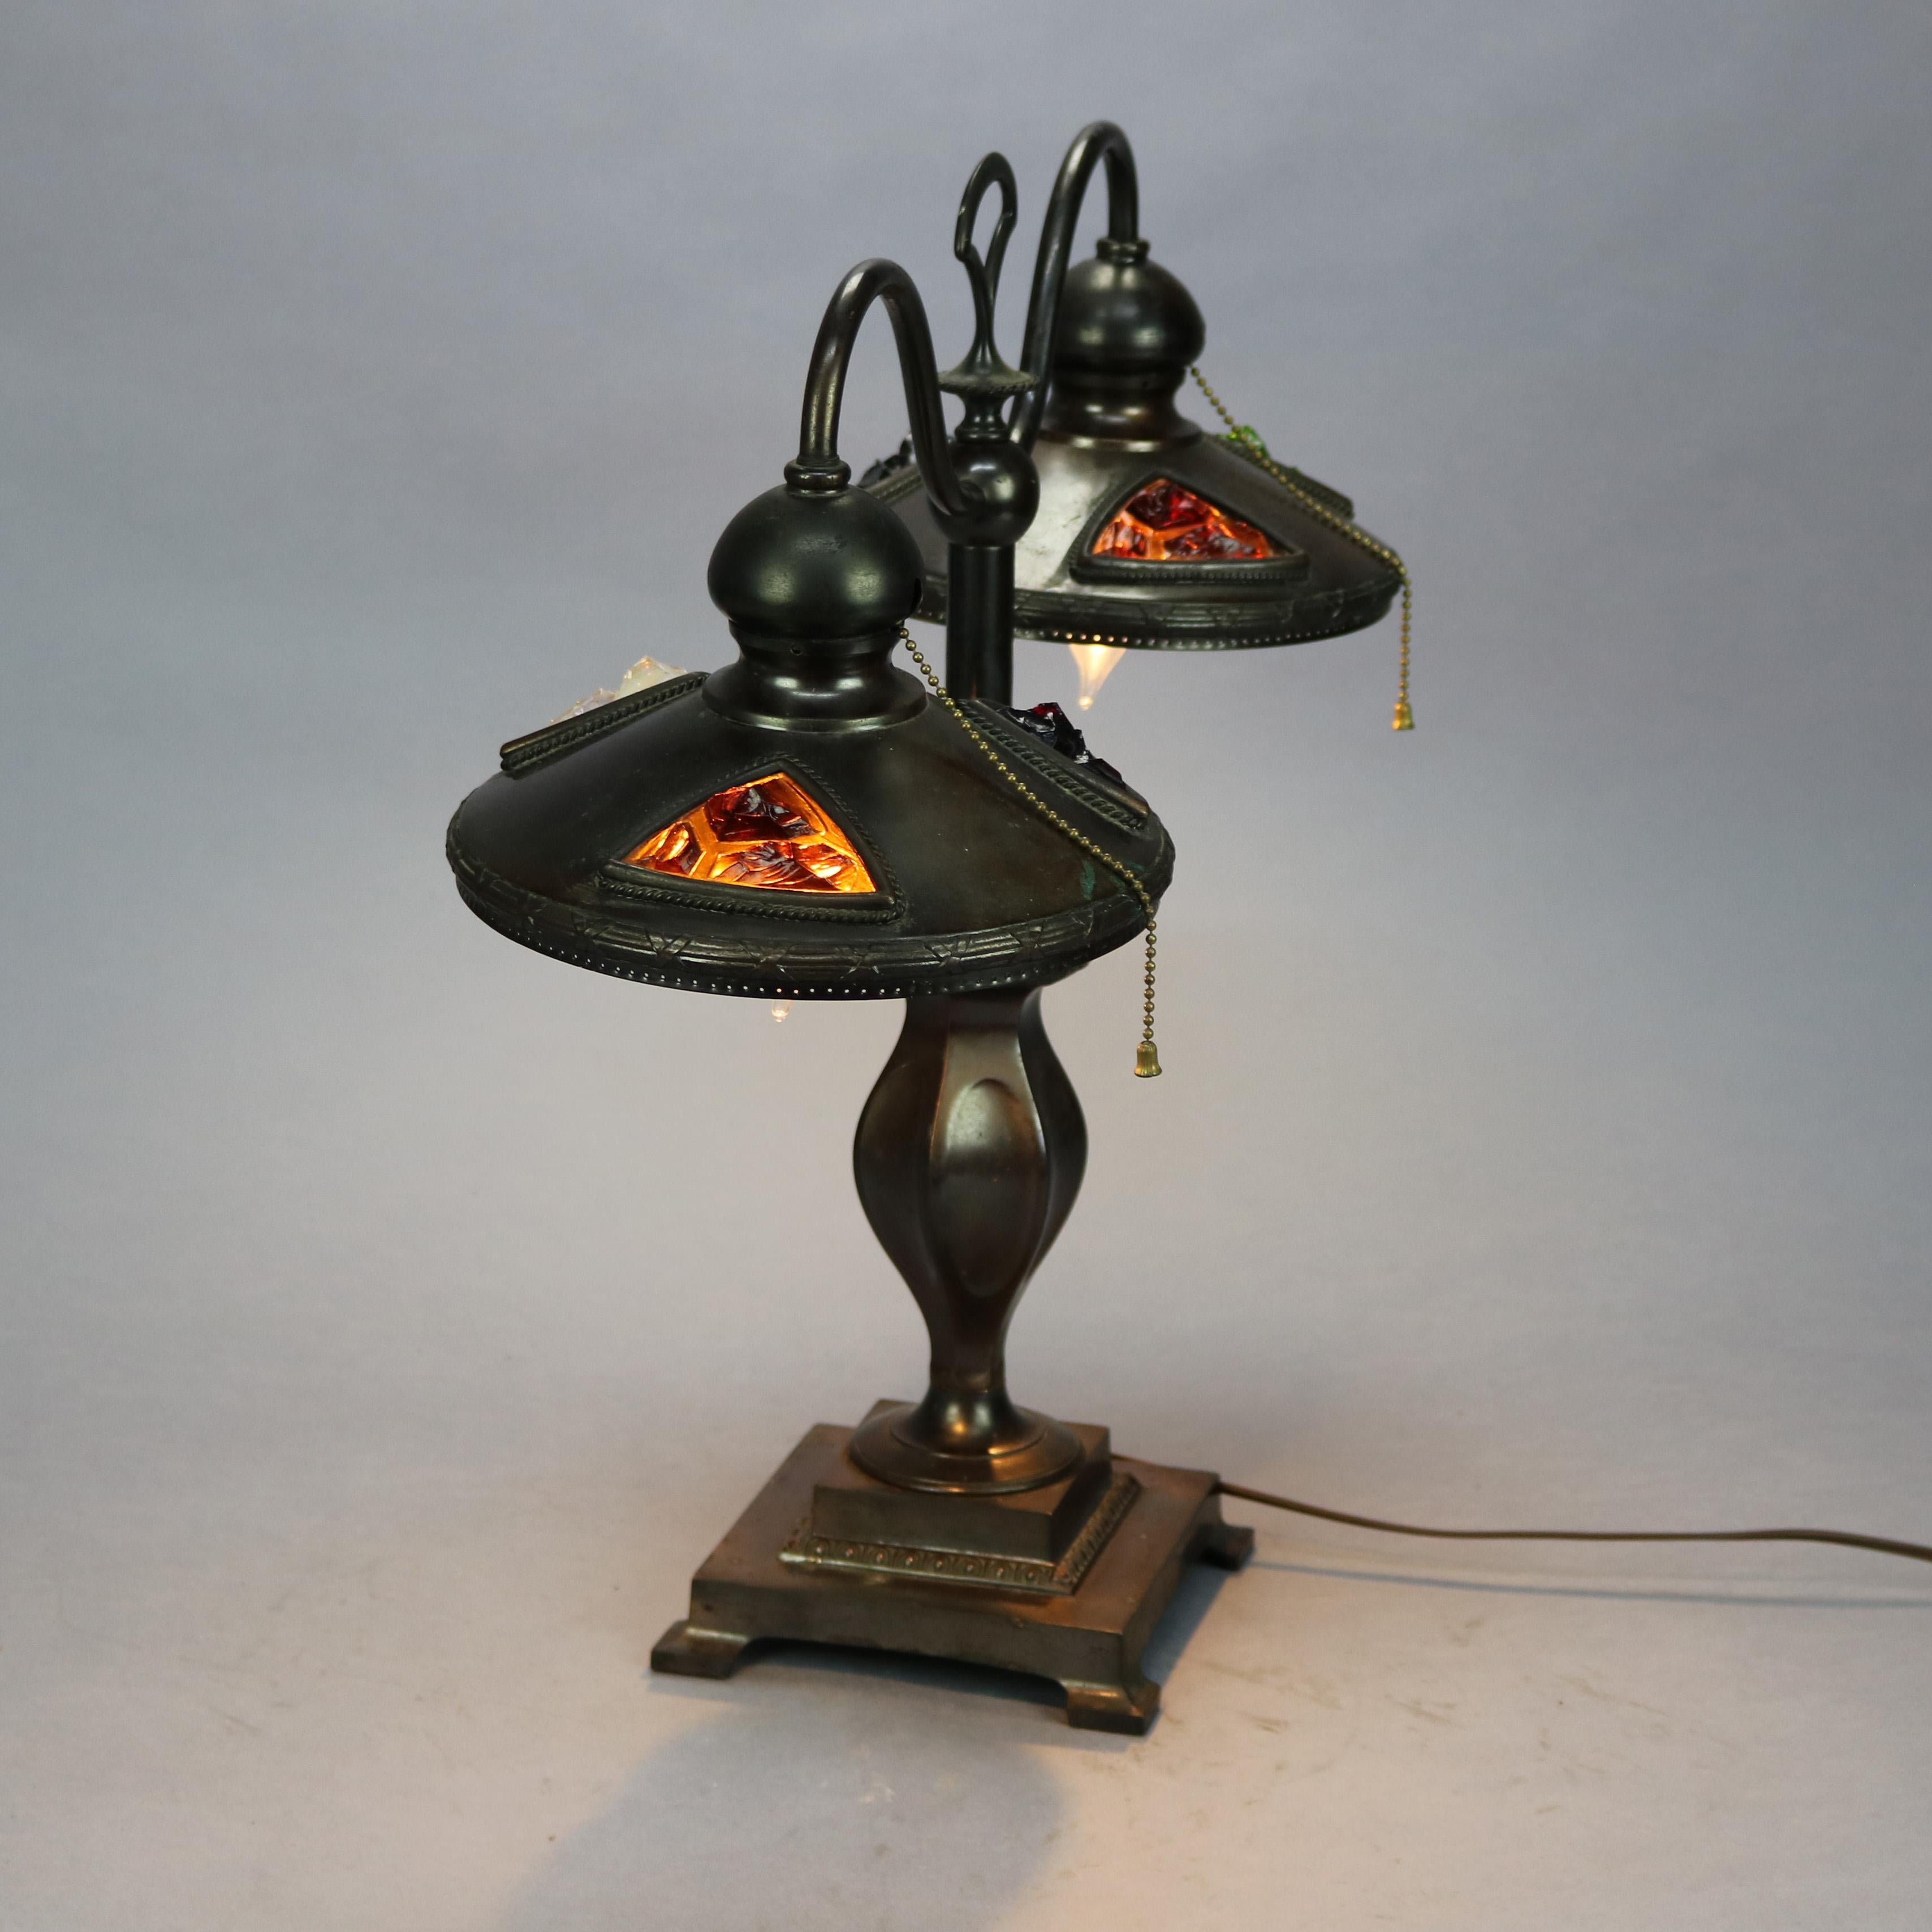 An Art Nouveau Austrian table lamp offers bronzed cast metal urn form base with double s-scroll arms terminating in light shades having chunk jeweled glass insets, wired for US electricity, c1910.

Measures: 19.5